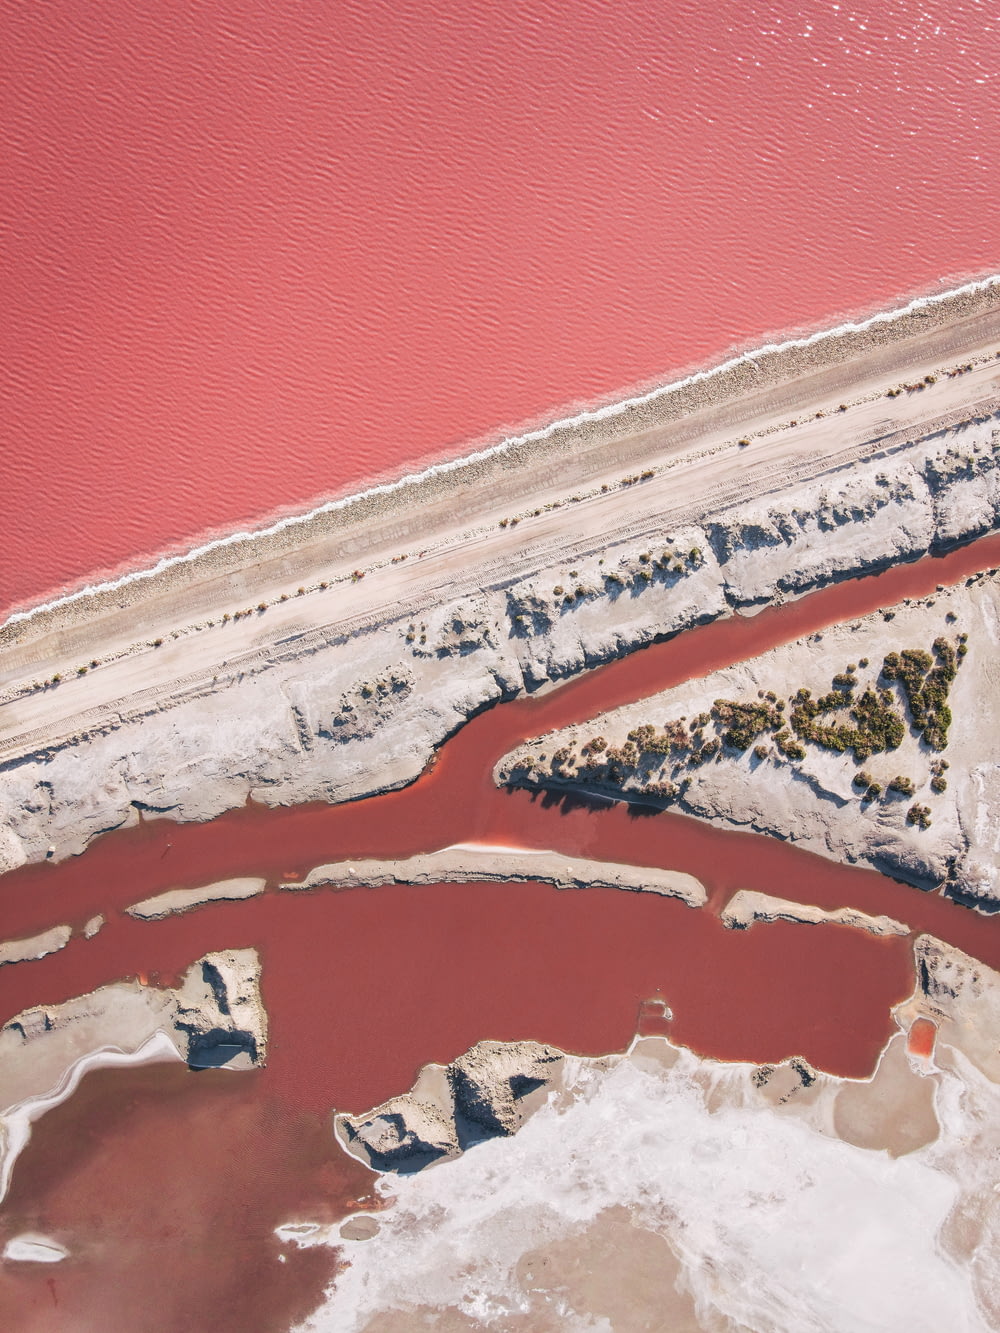 an aerial view of a body of water with red water